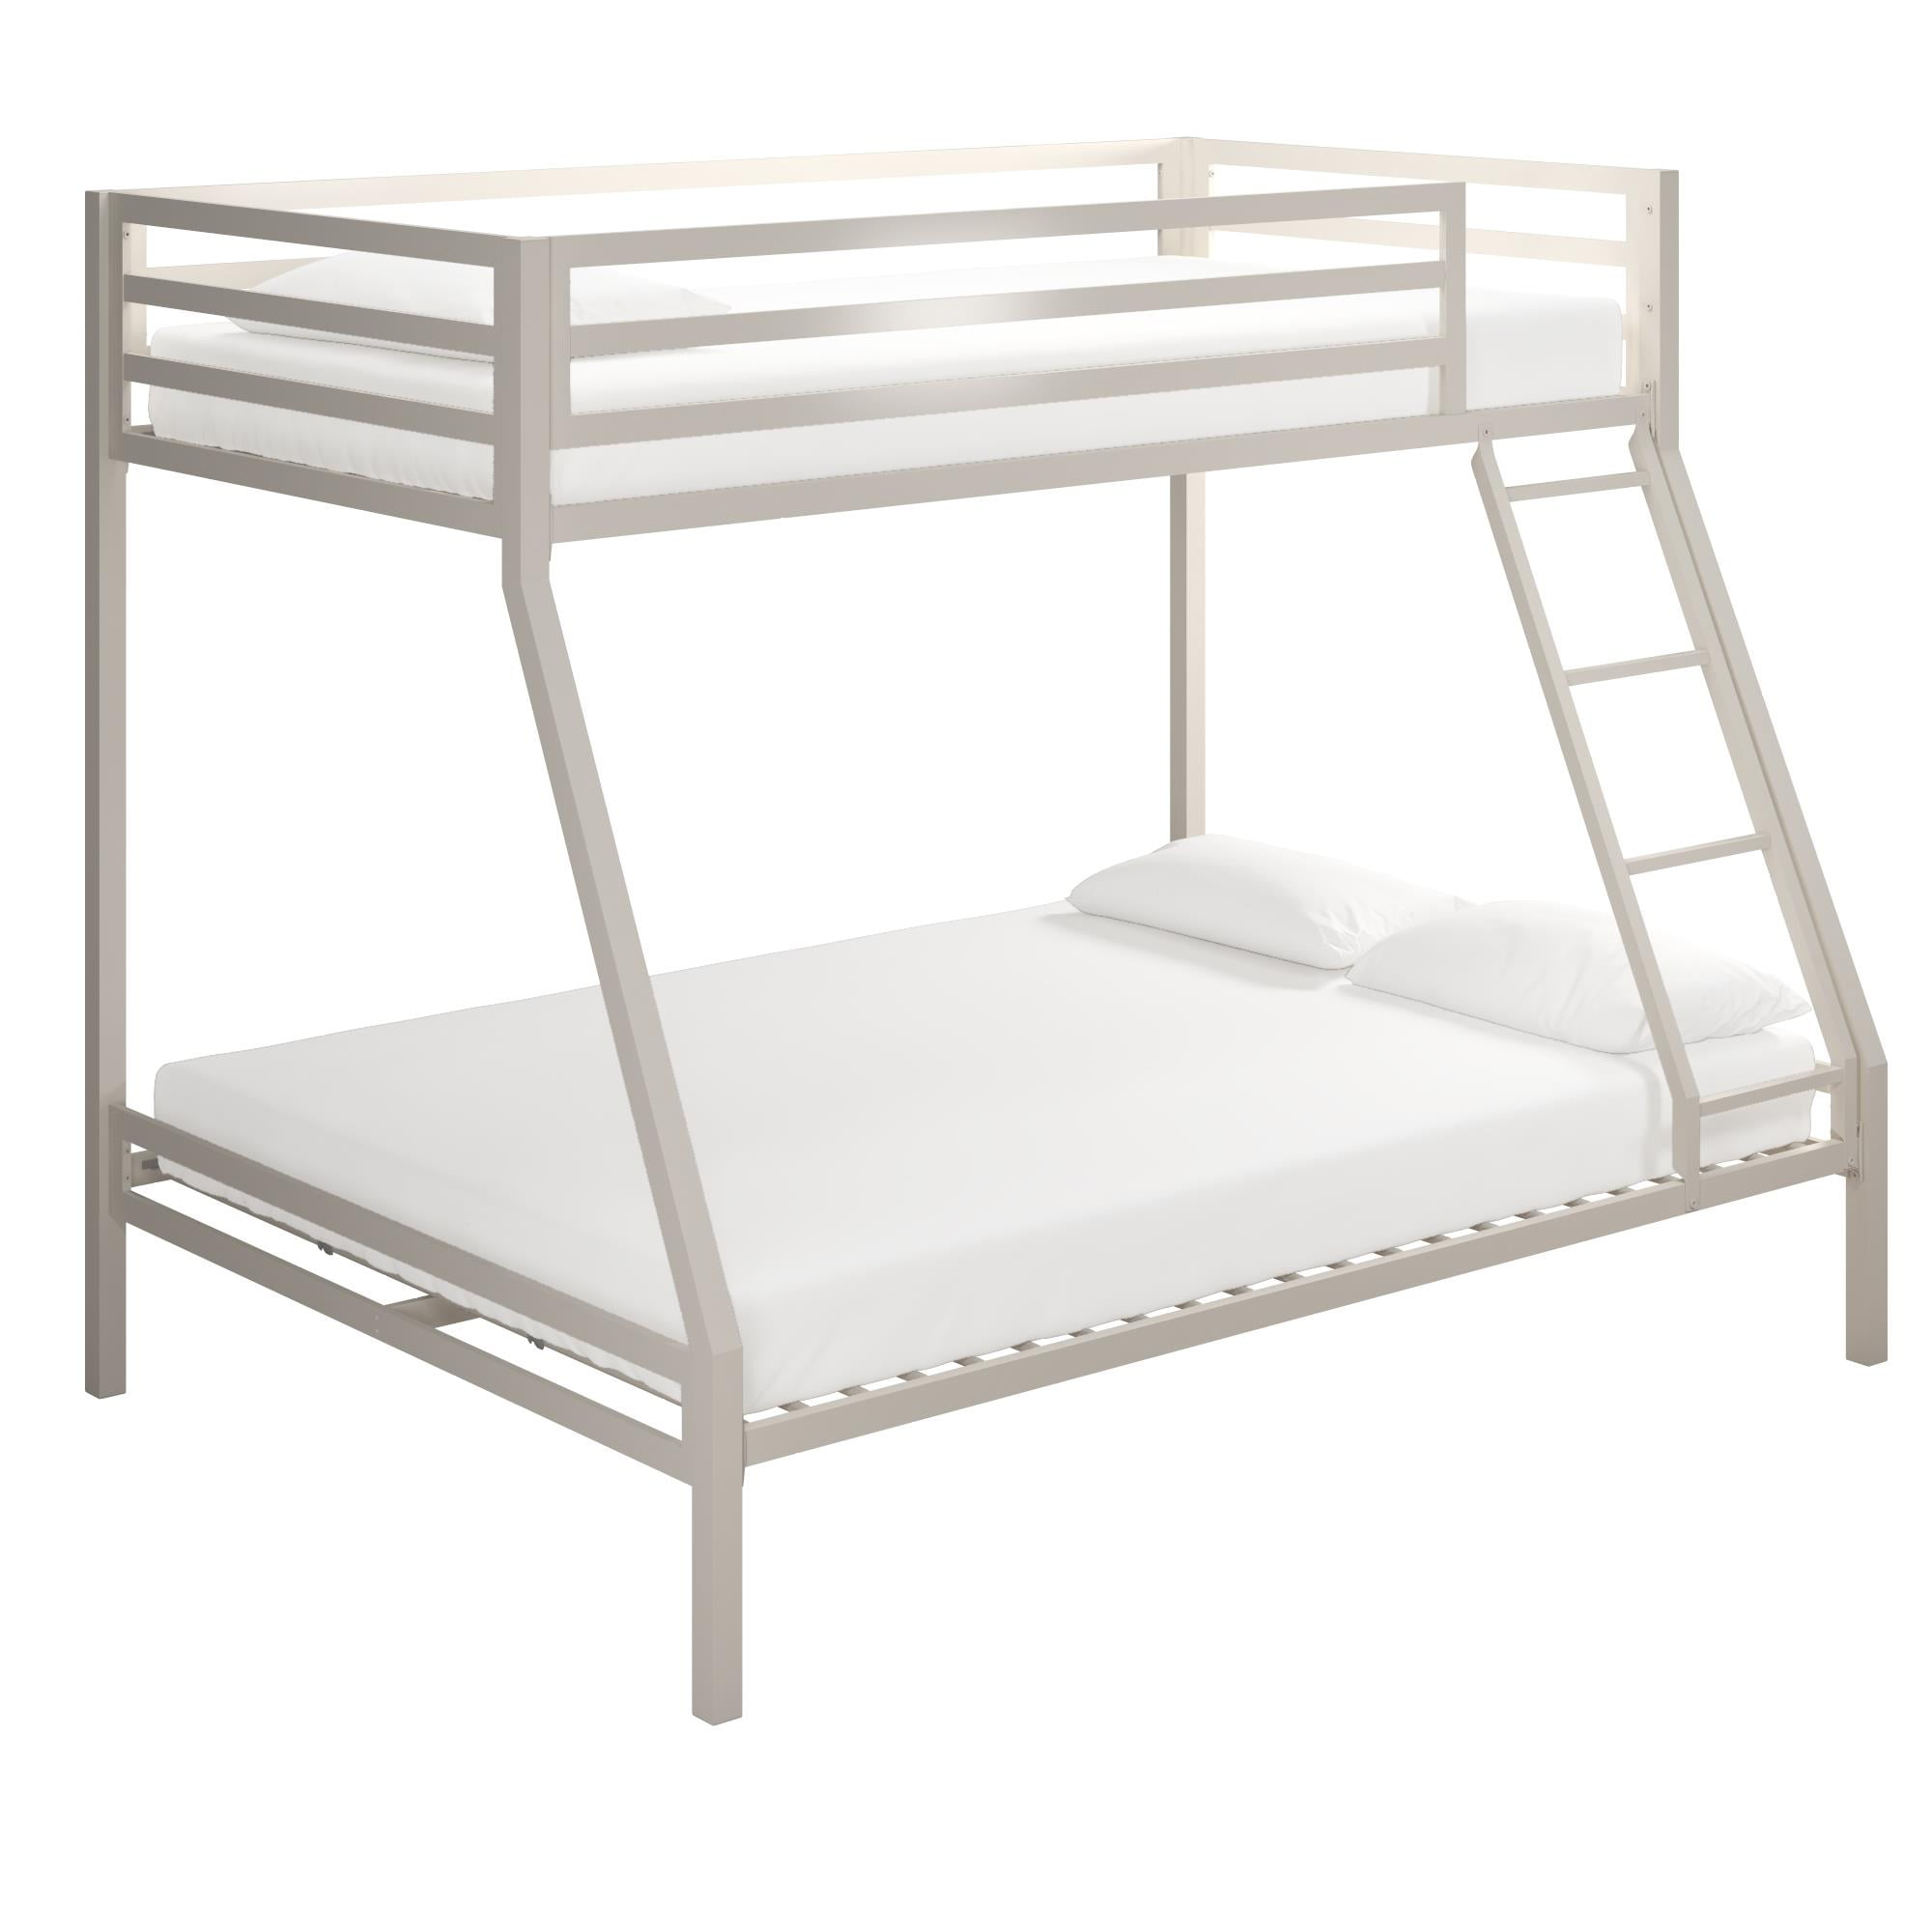 Mainstays Premium Twin Over Full Bunk Bed, Mainstays Twin Over Full Bunk Bed Instructions